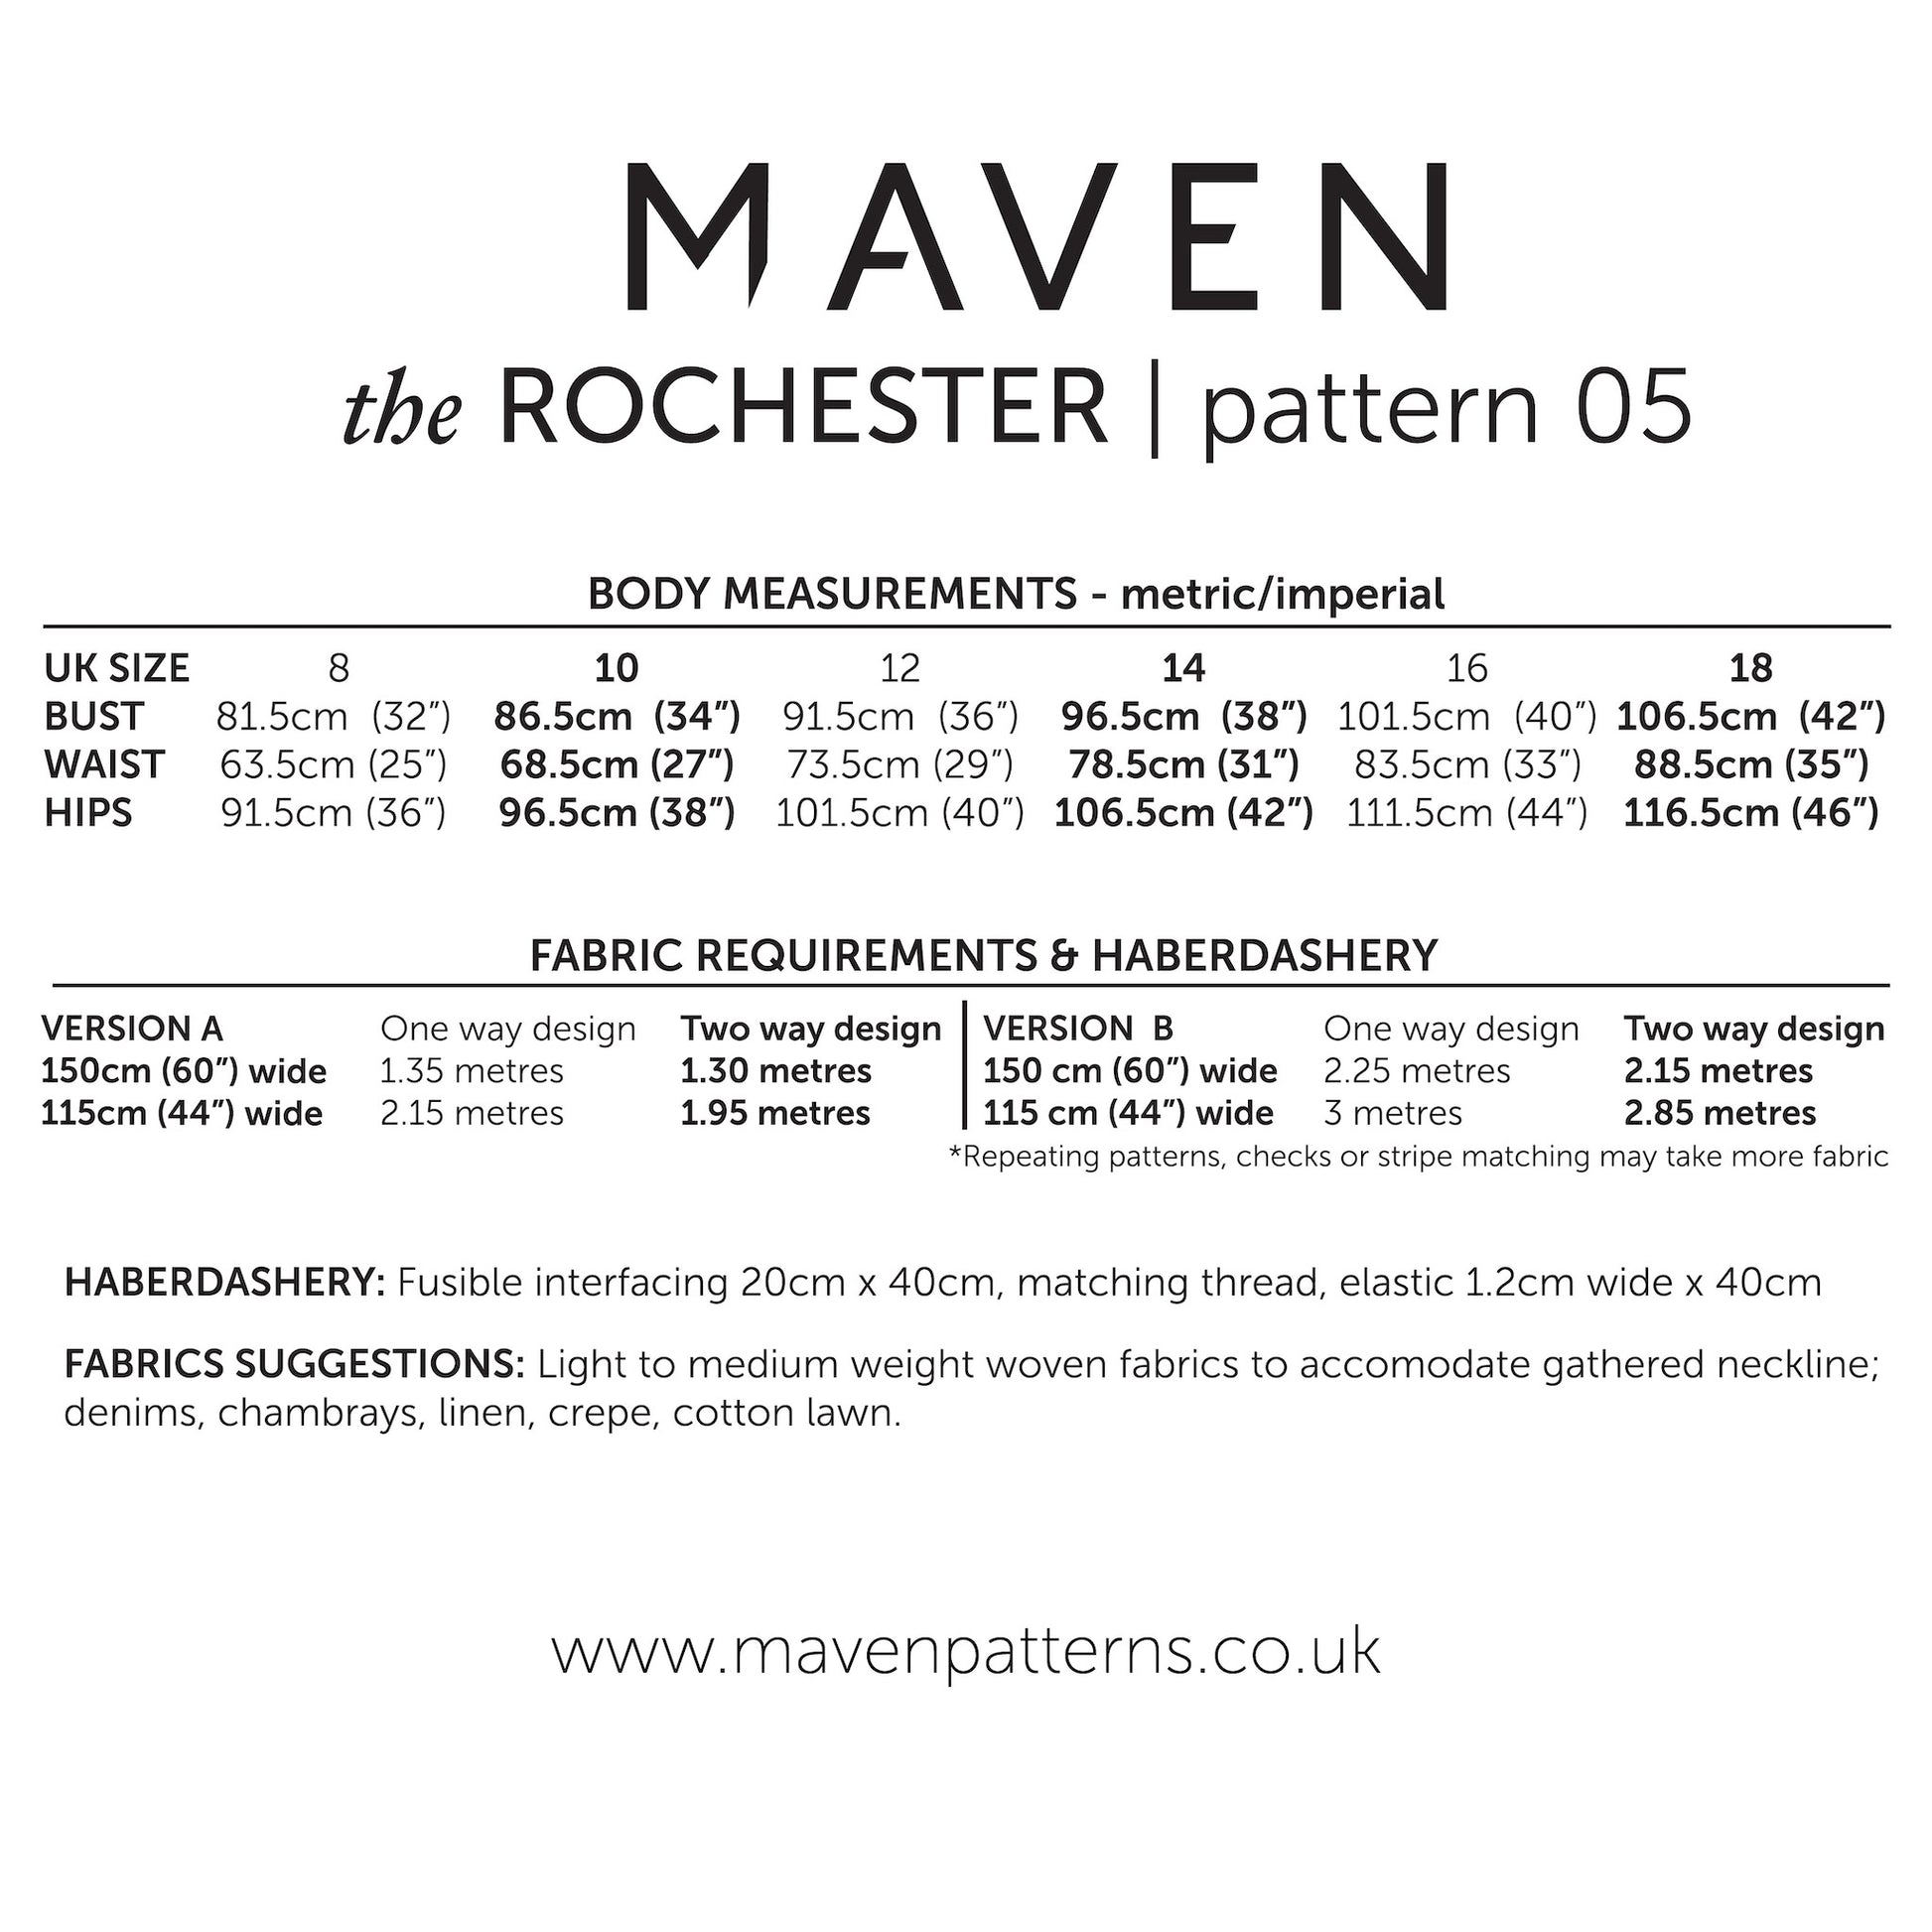 VERSION A | The Rochester Top is mid-hip length and great to wear with jeans. VERSION B | The Rochester Dress is knee length with a self-tie belt and in-seam pockets. Indie sewing patterns, contemporary and modern sewing patterns made in the UK.